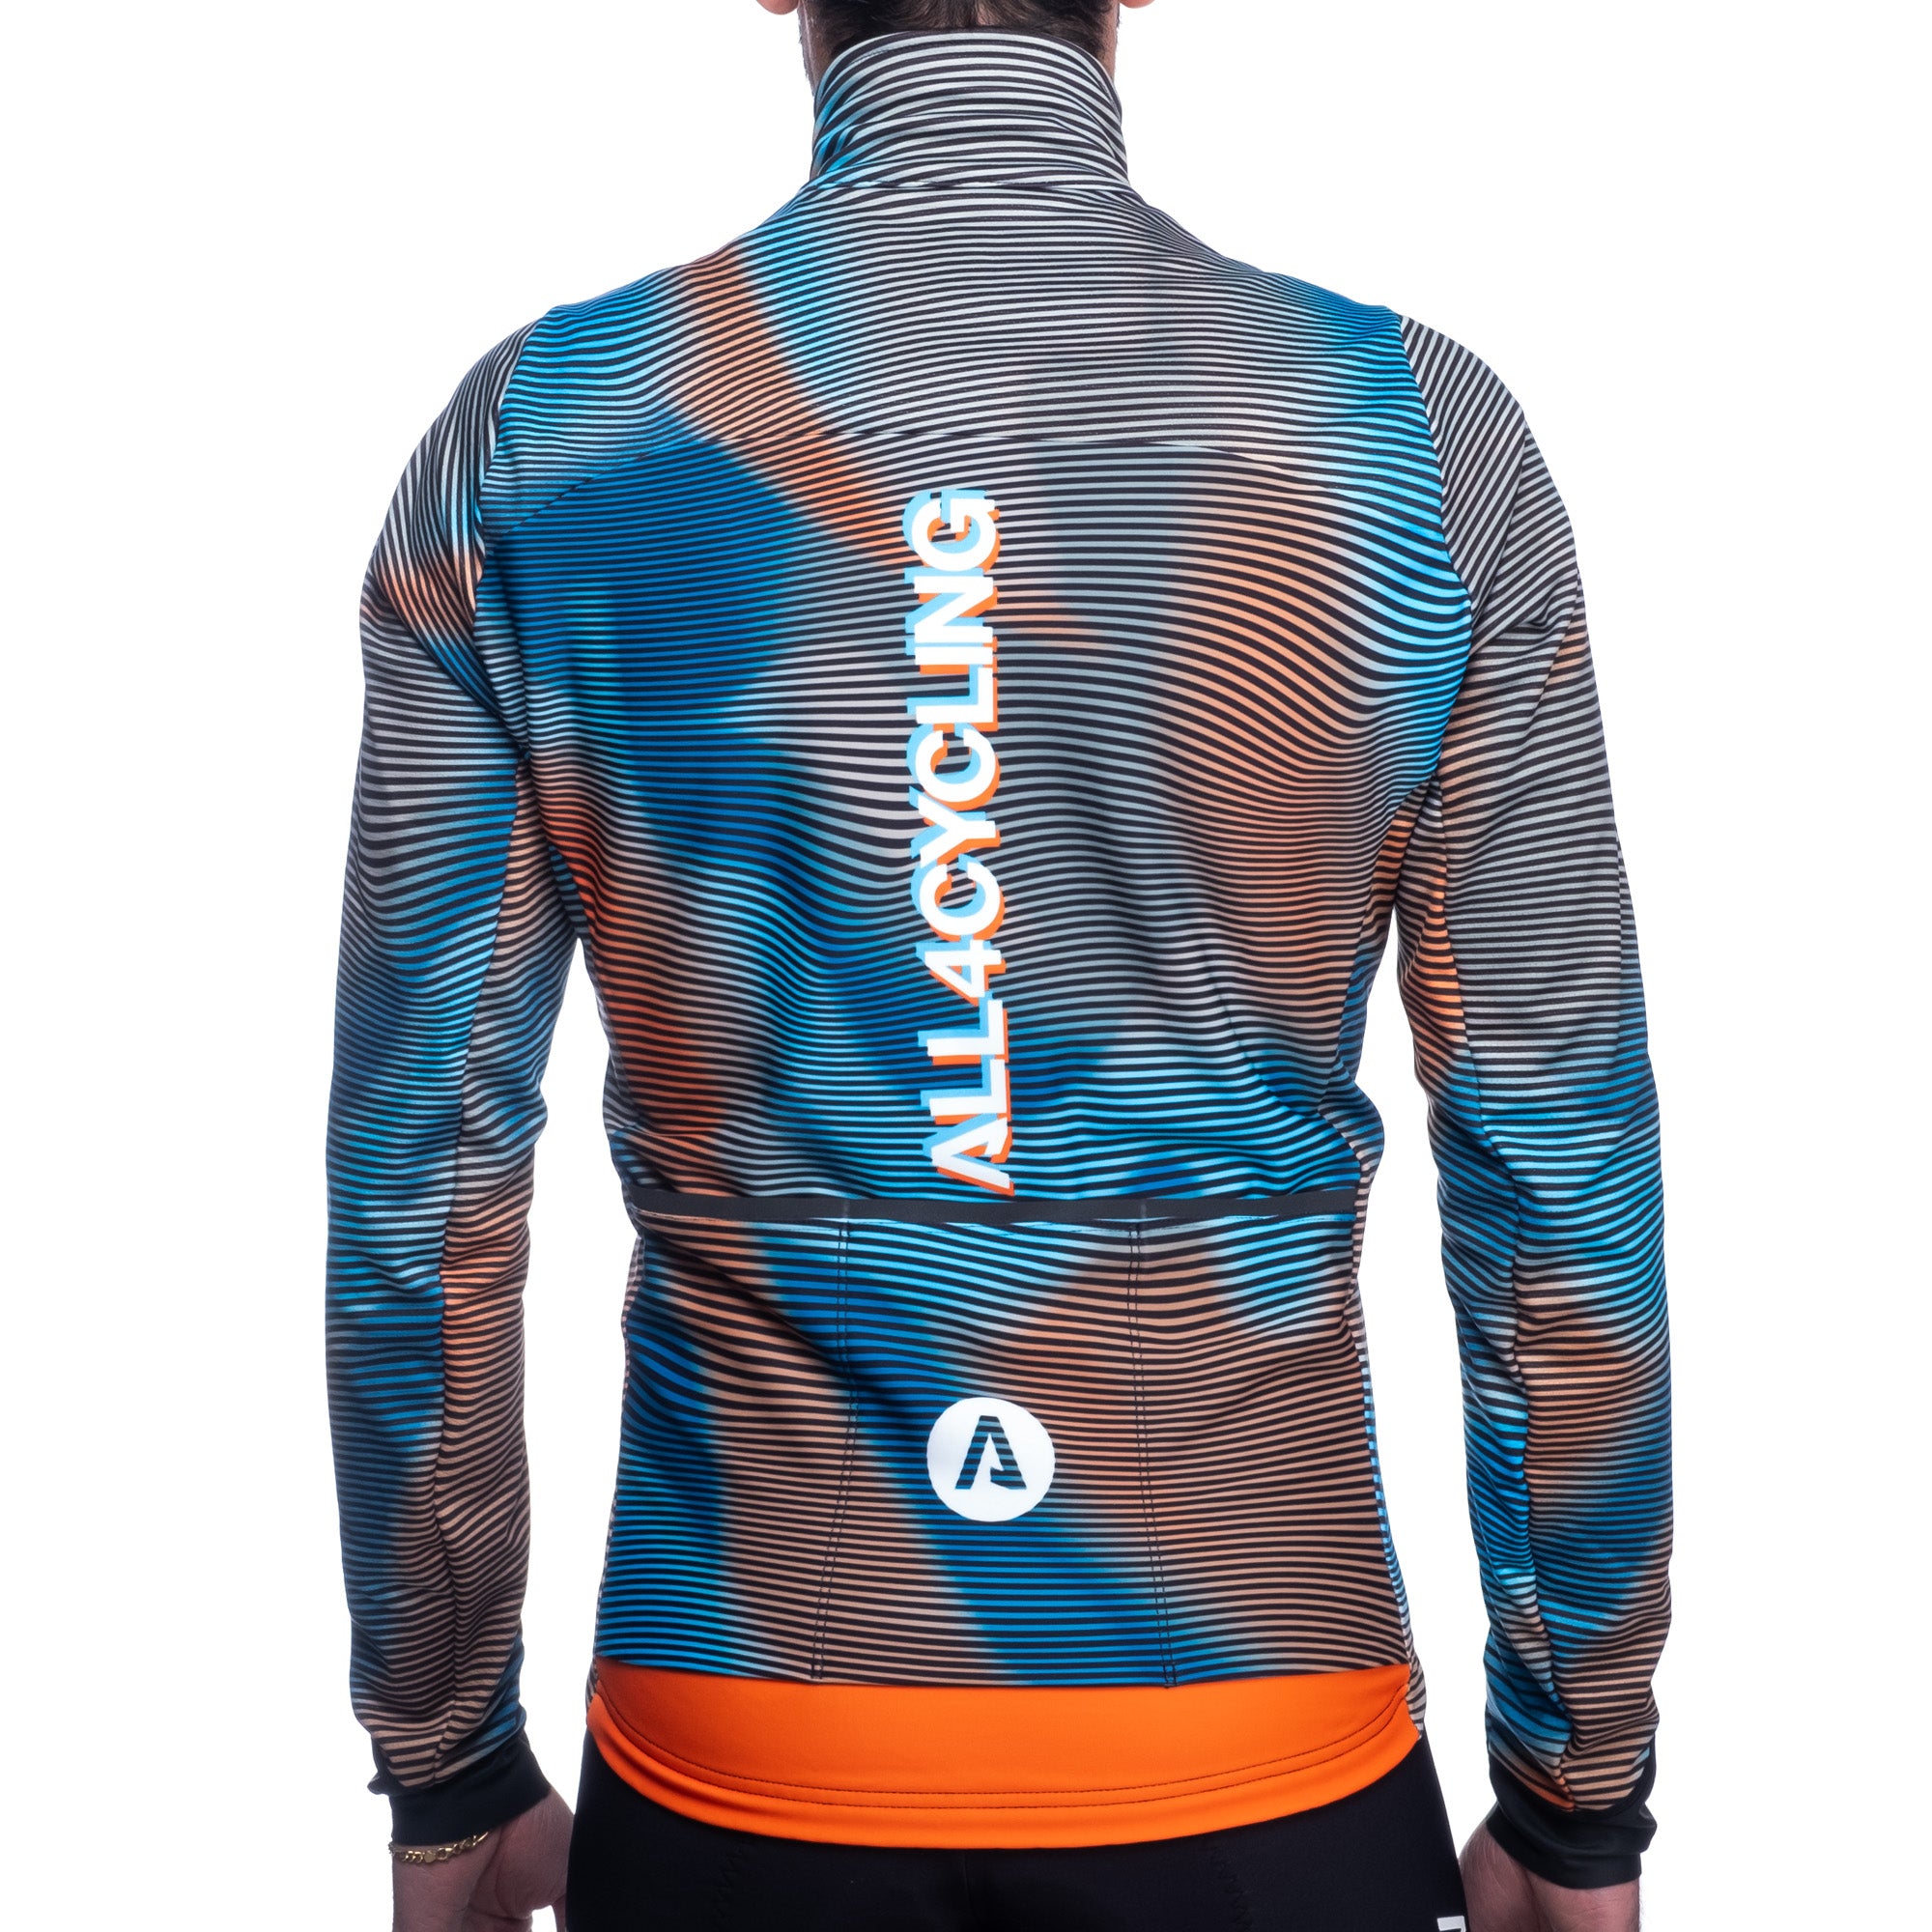 All4cycling Team jacket